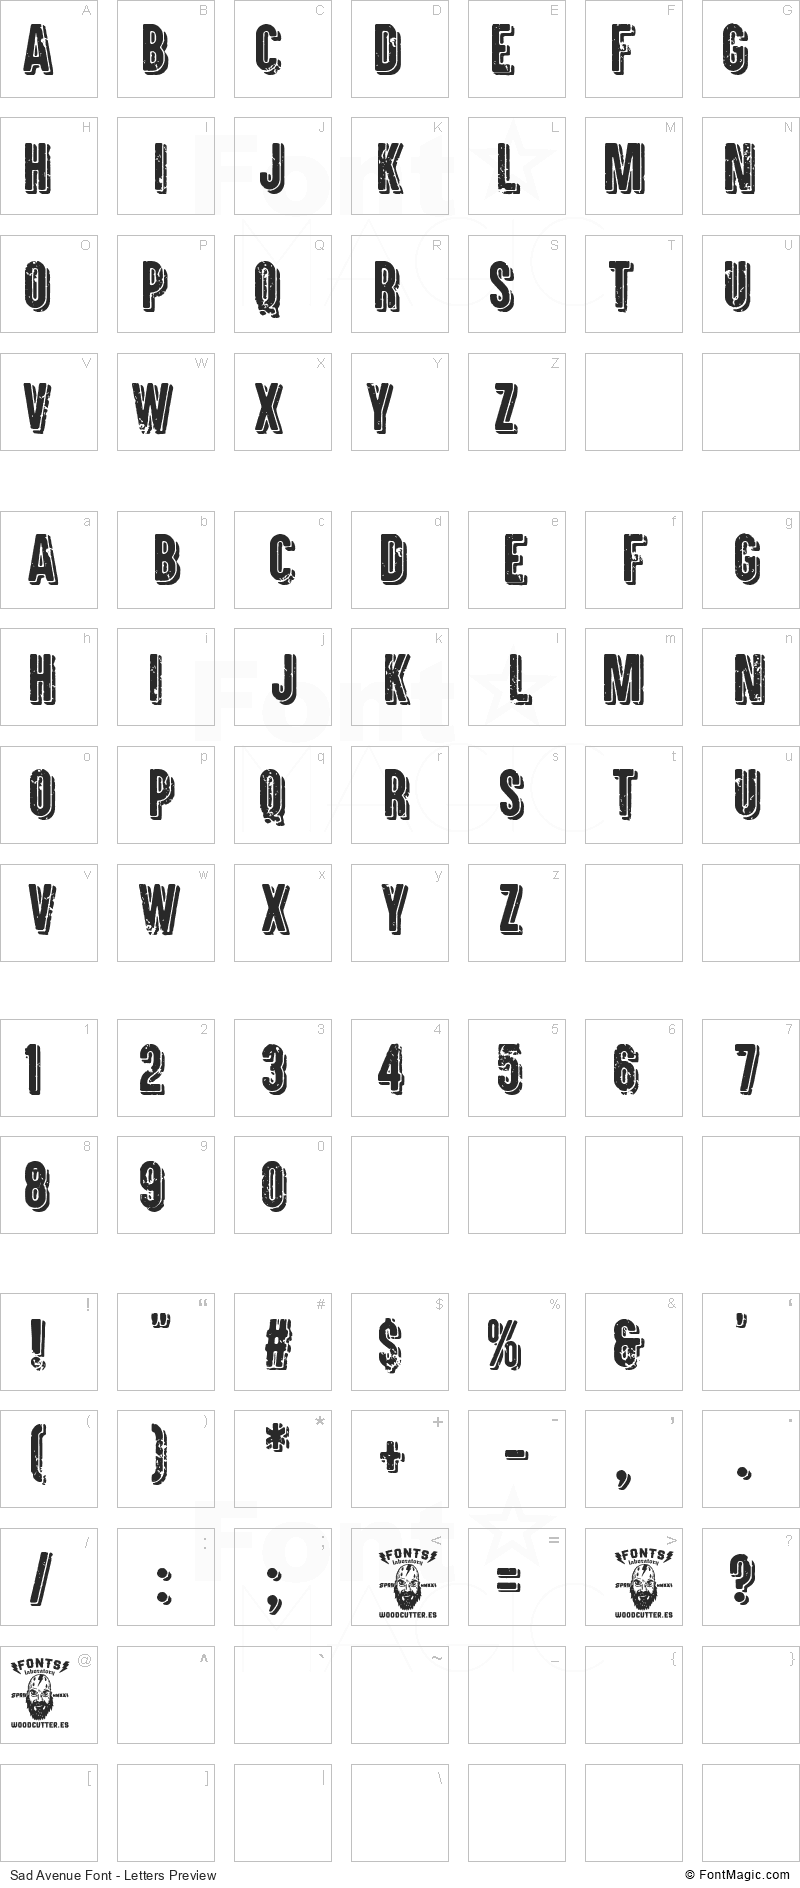 Sad Avenue Font - All Latters Preview Chart